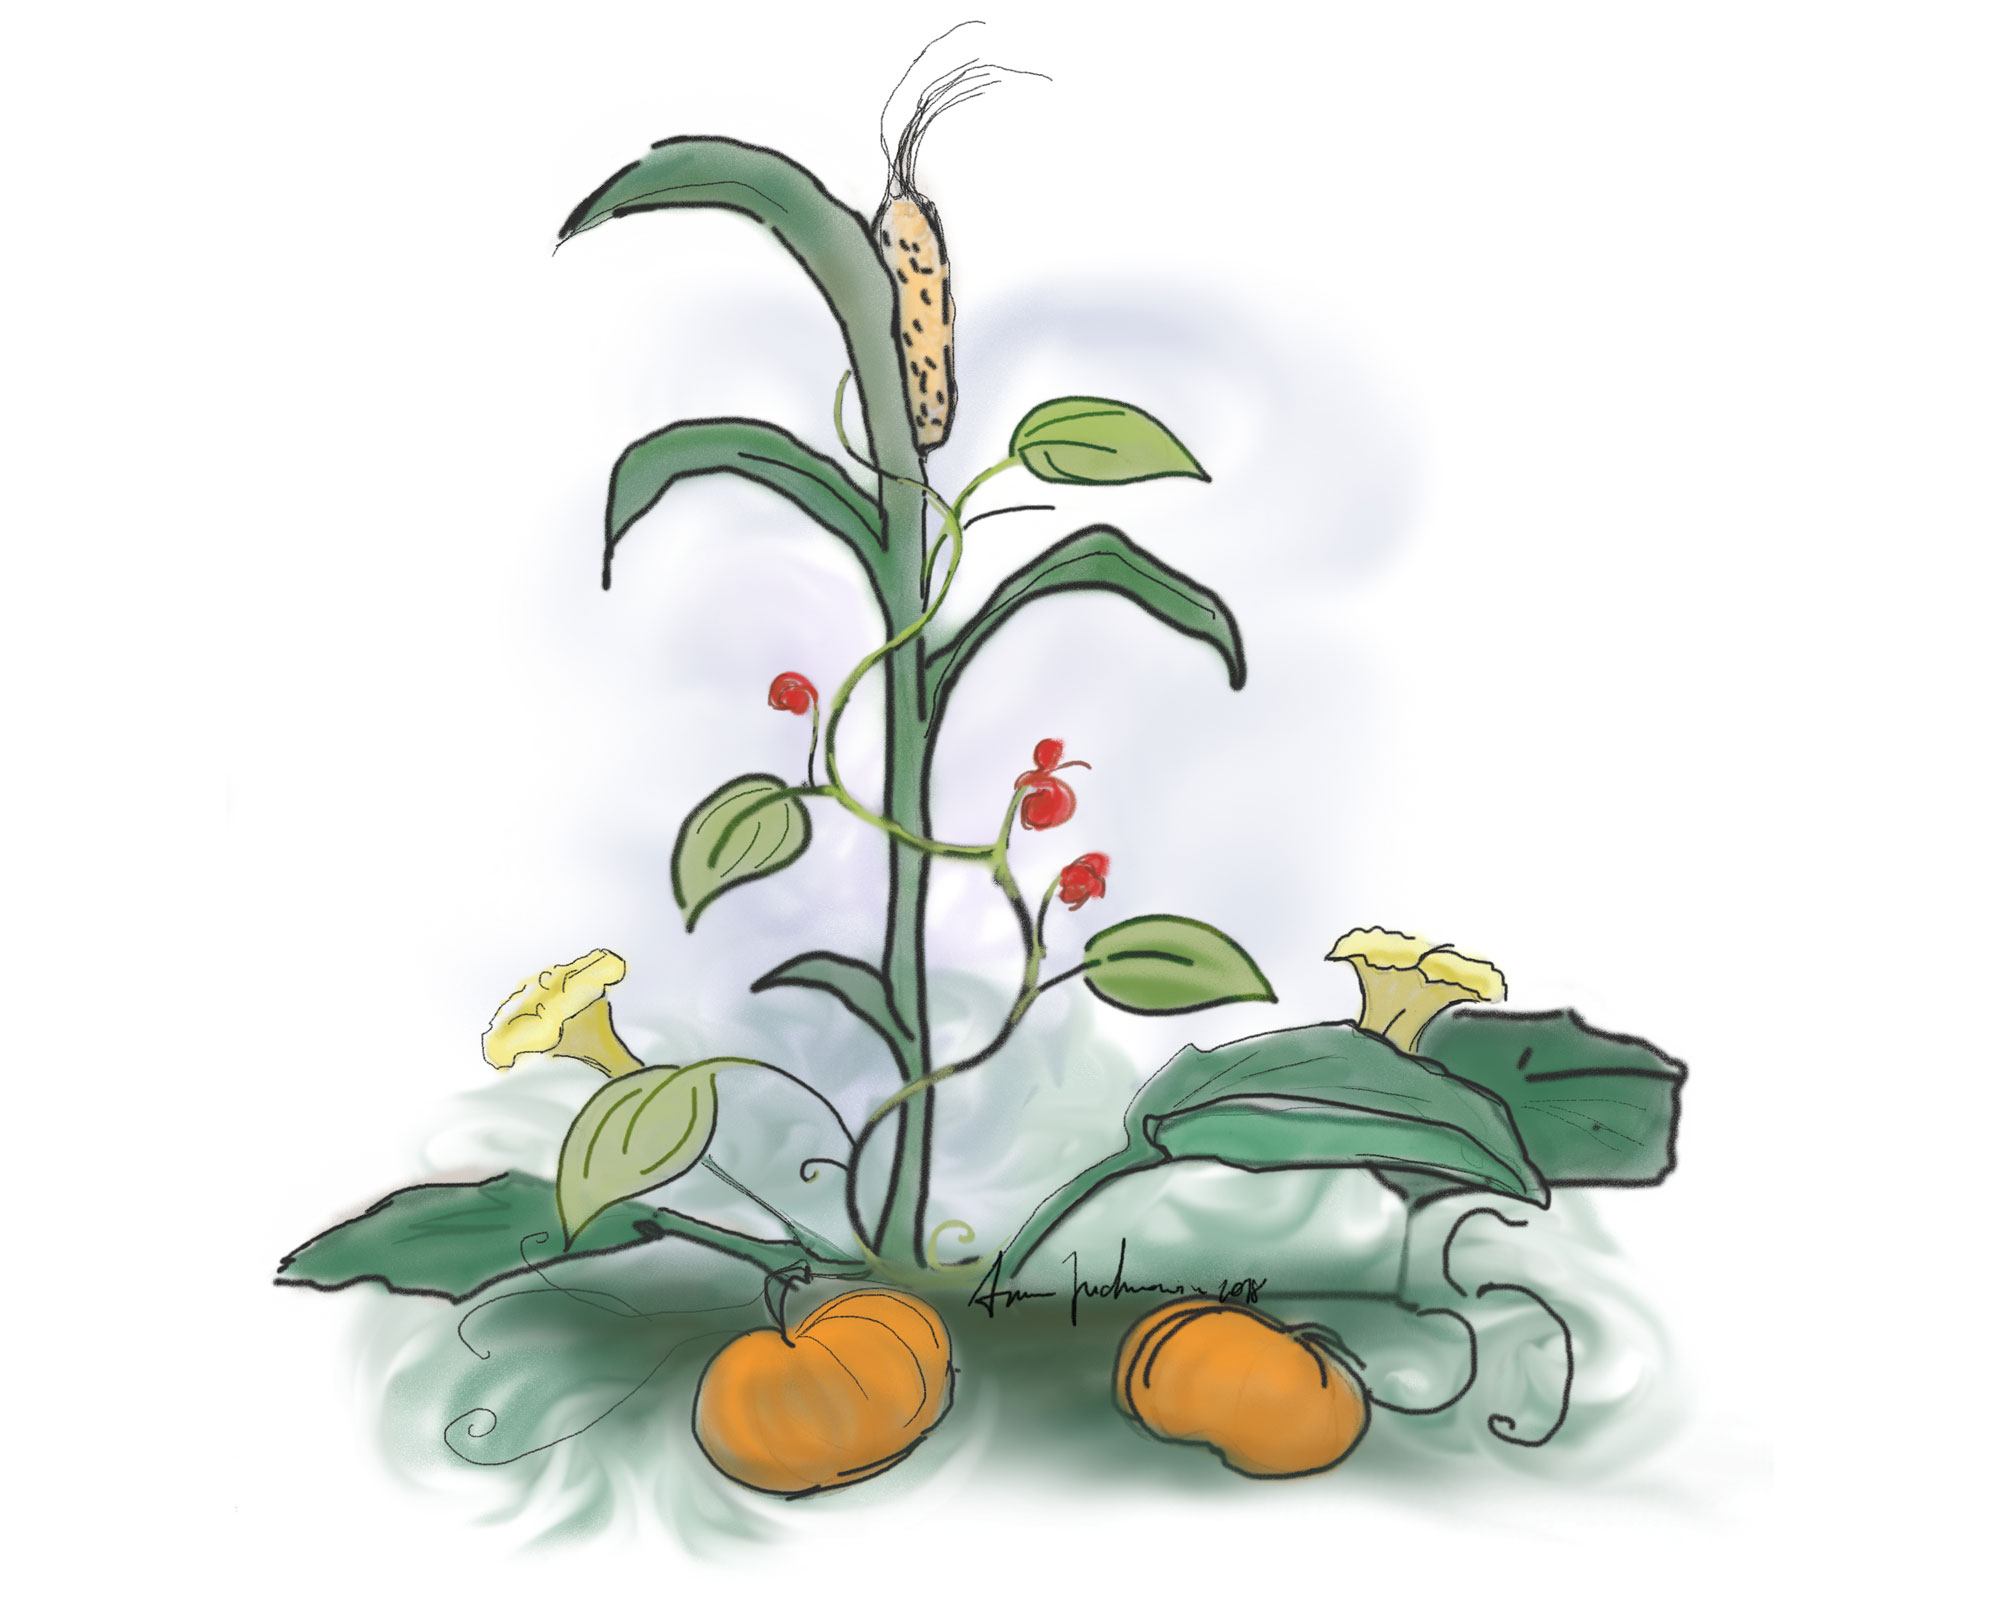 Illustration of the three sisters method of companion cultivation, where maize, beans, and squash are grown together. The bean plant is shown twining up the maize stalk, and the squash forms a ground cover.